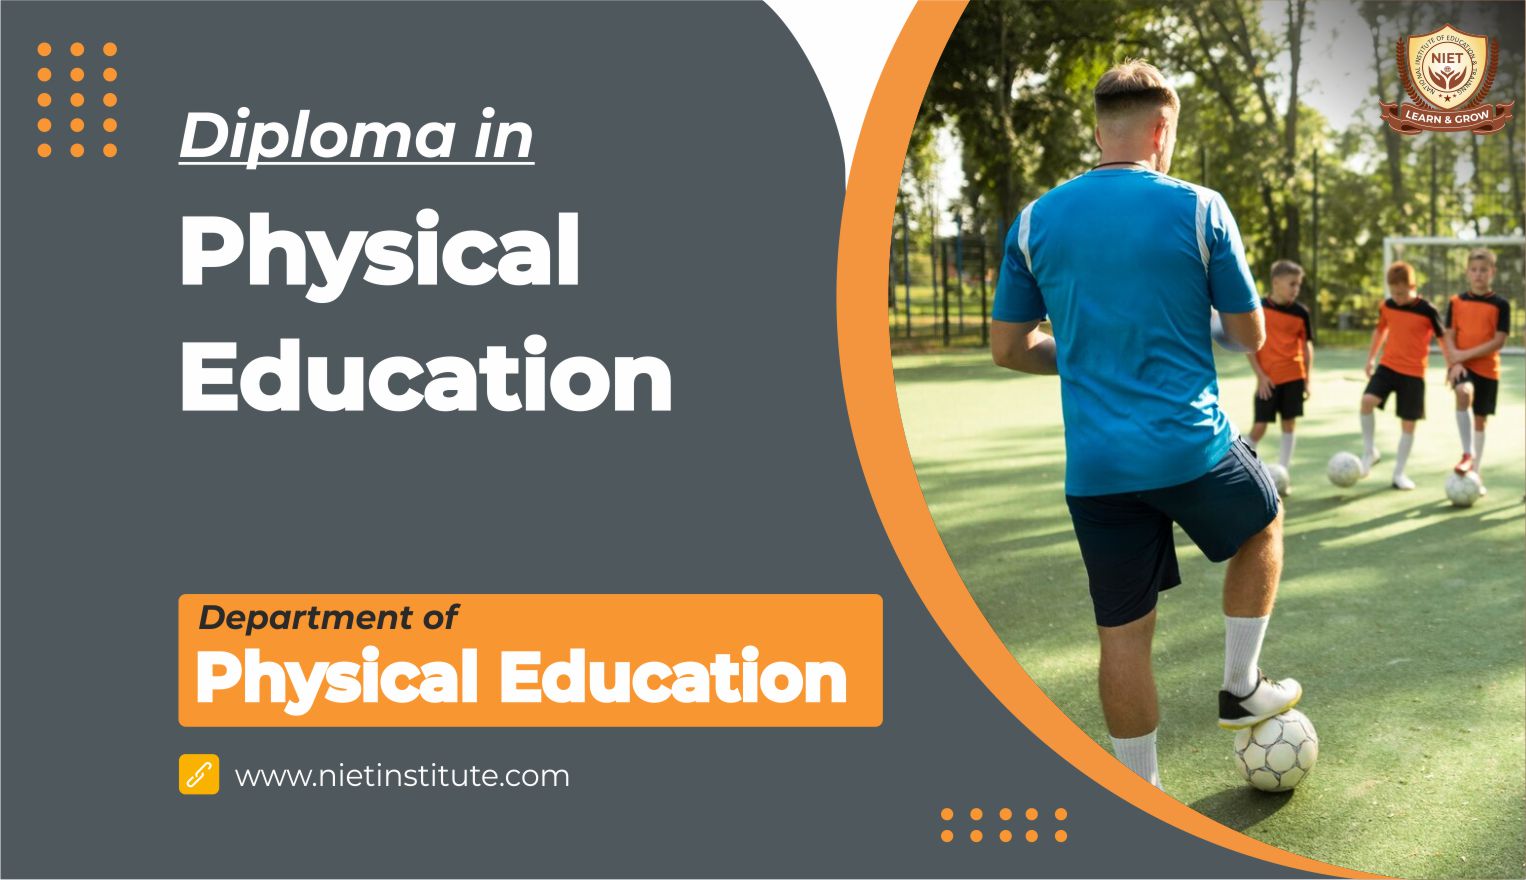 Diploma-in-Physical-Education